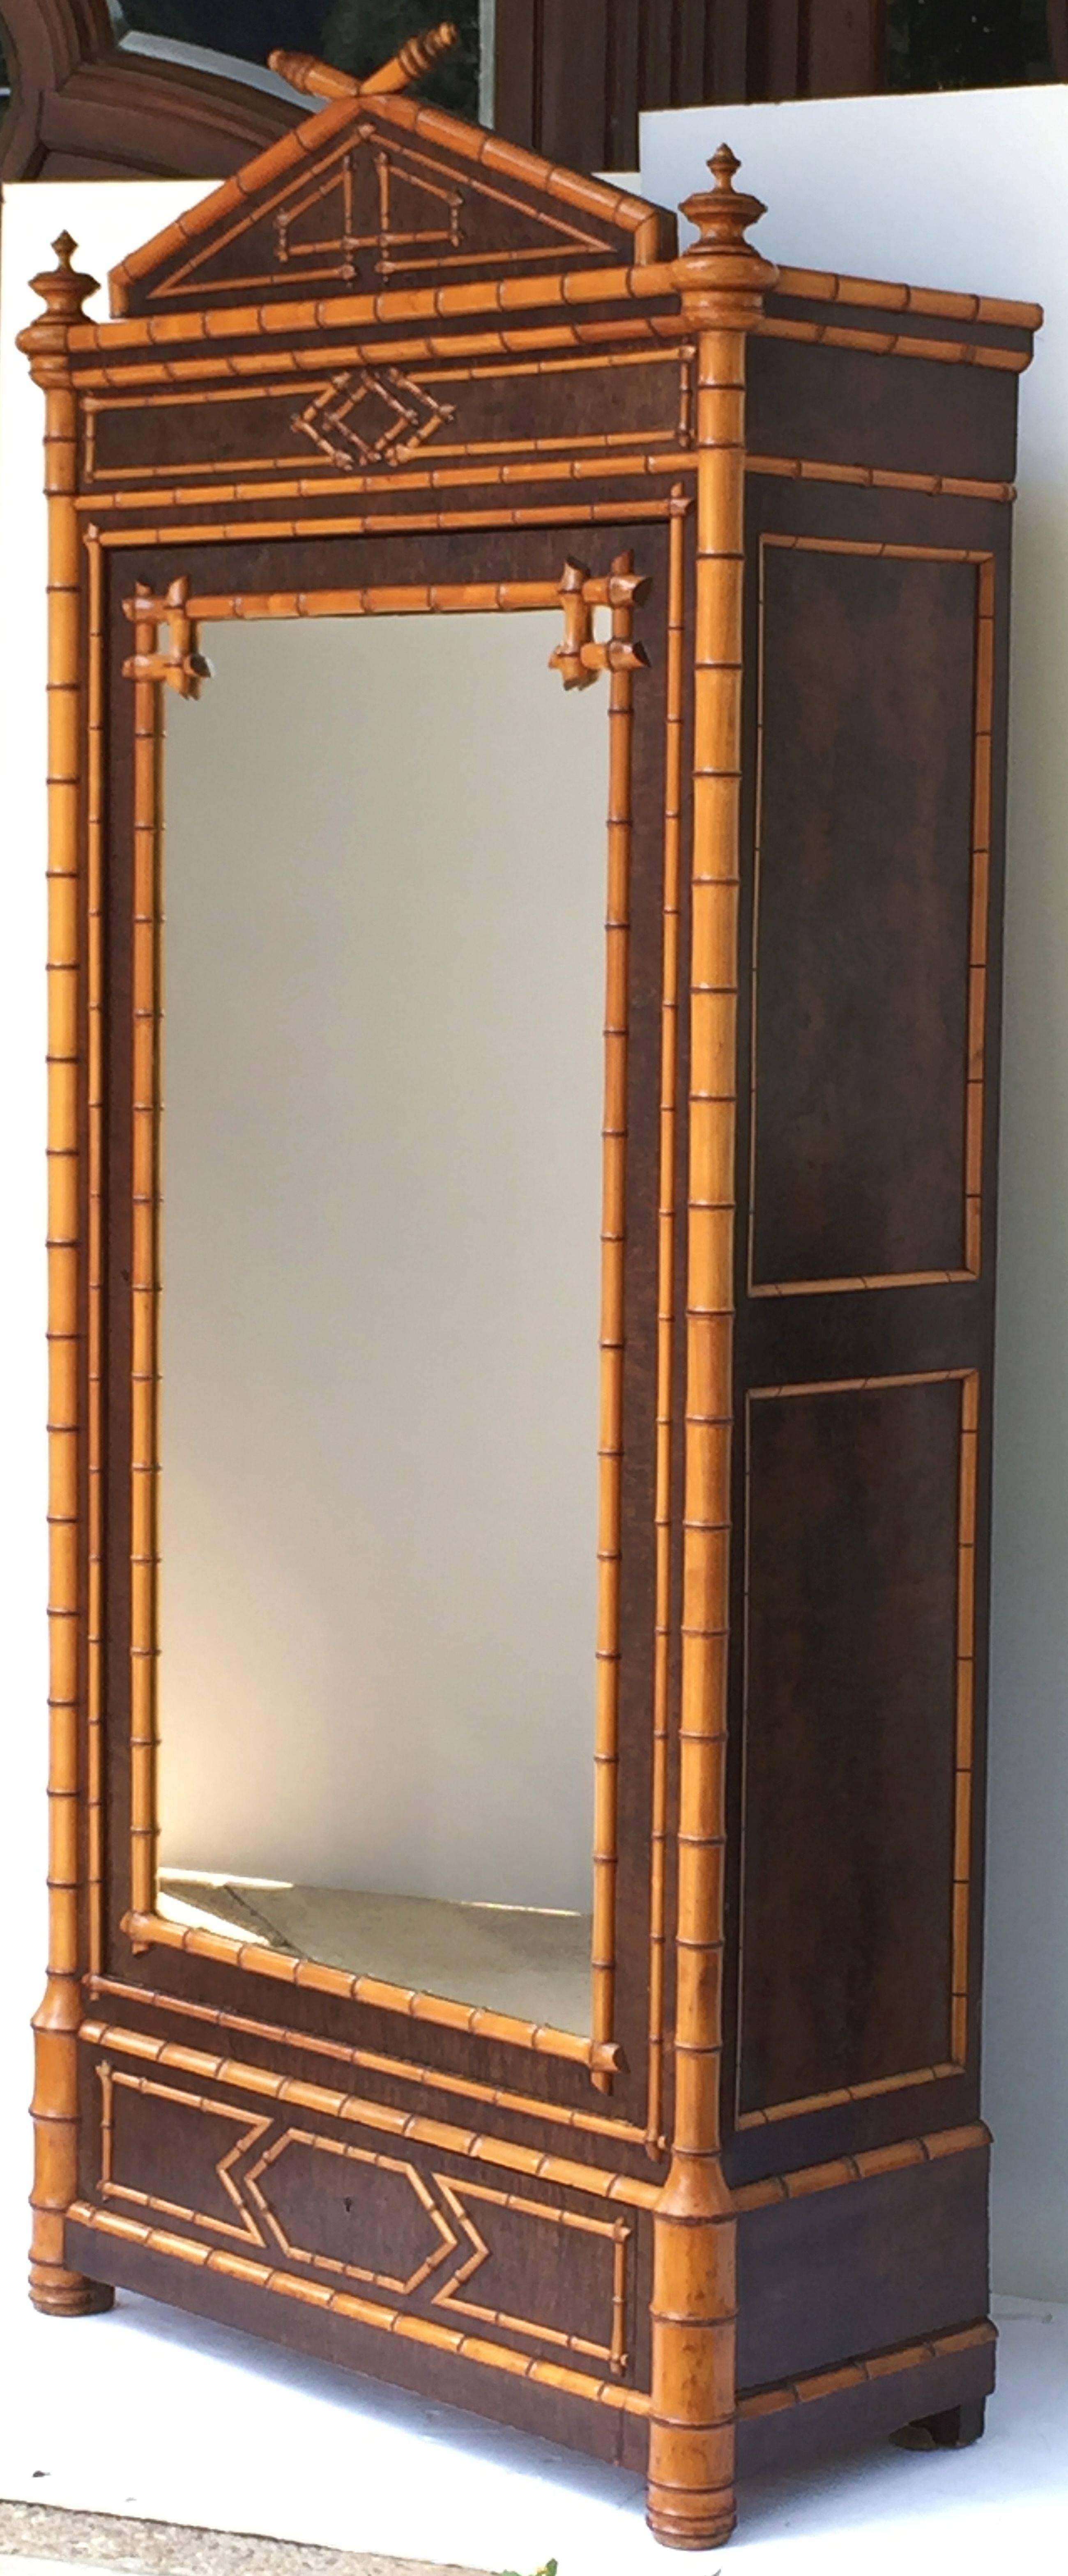 A fine French faux bamboo armoire (or bookcase and display cabinet) of two-toned birds-eye or curly maple featuring a canopy top with decorative finials, over a glass or glazed door enclosing a cupboard space with adjustable shelves, each with faux